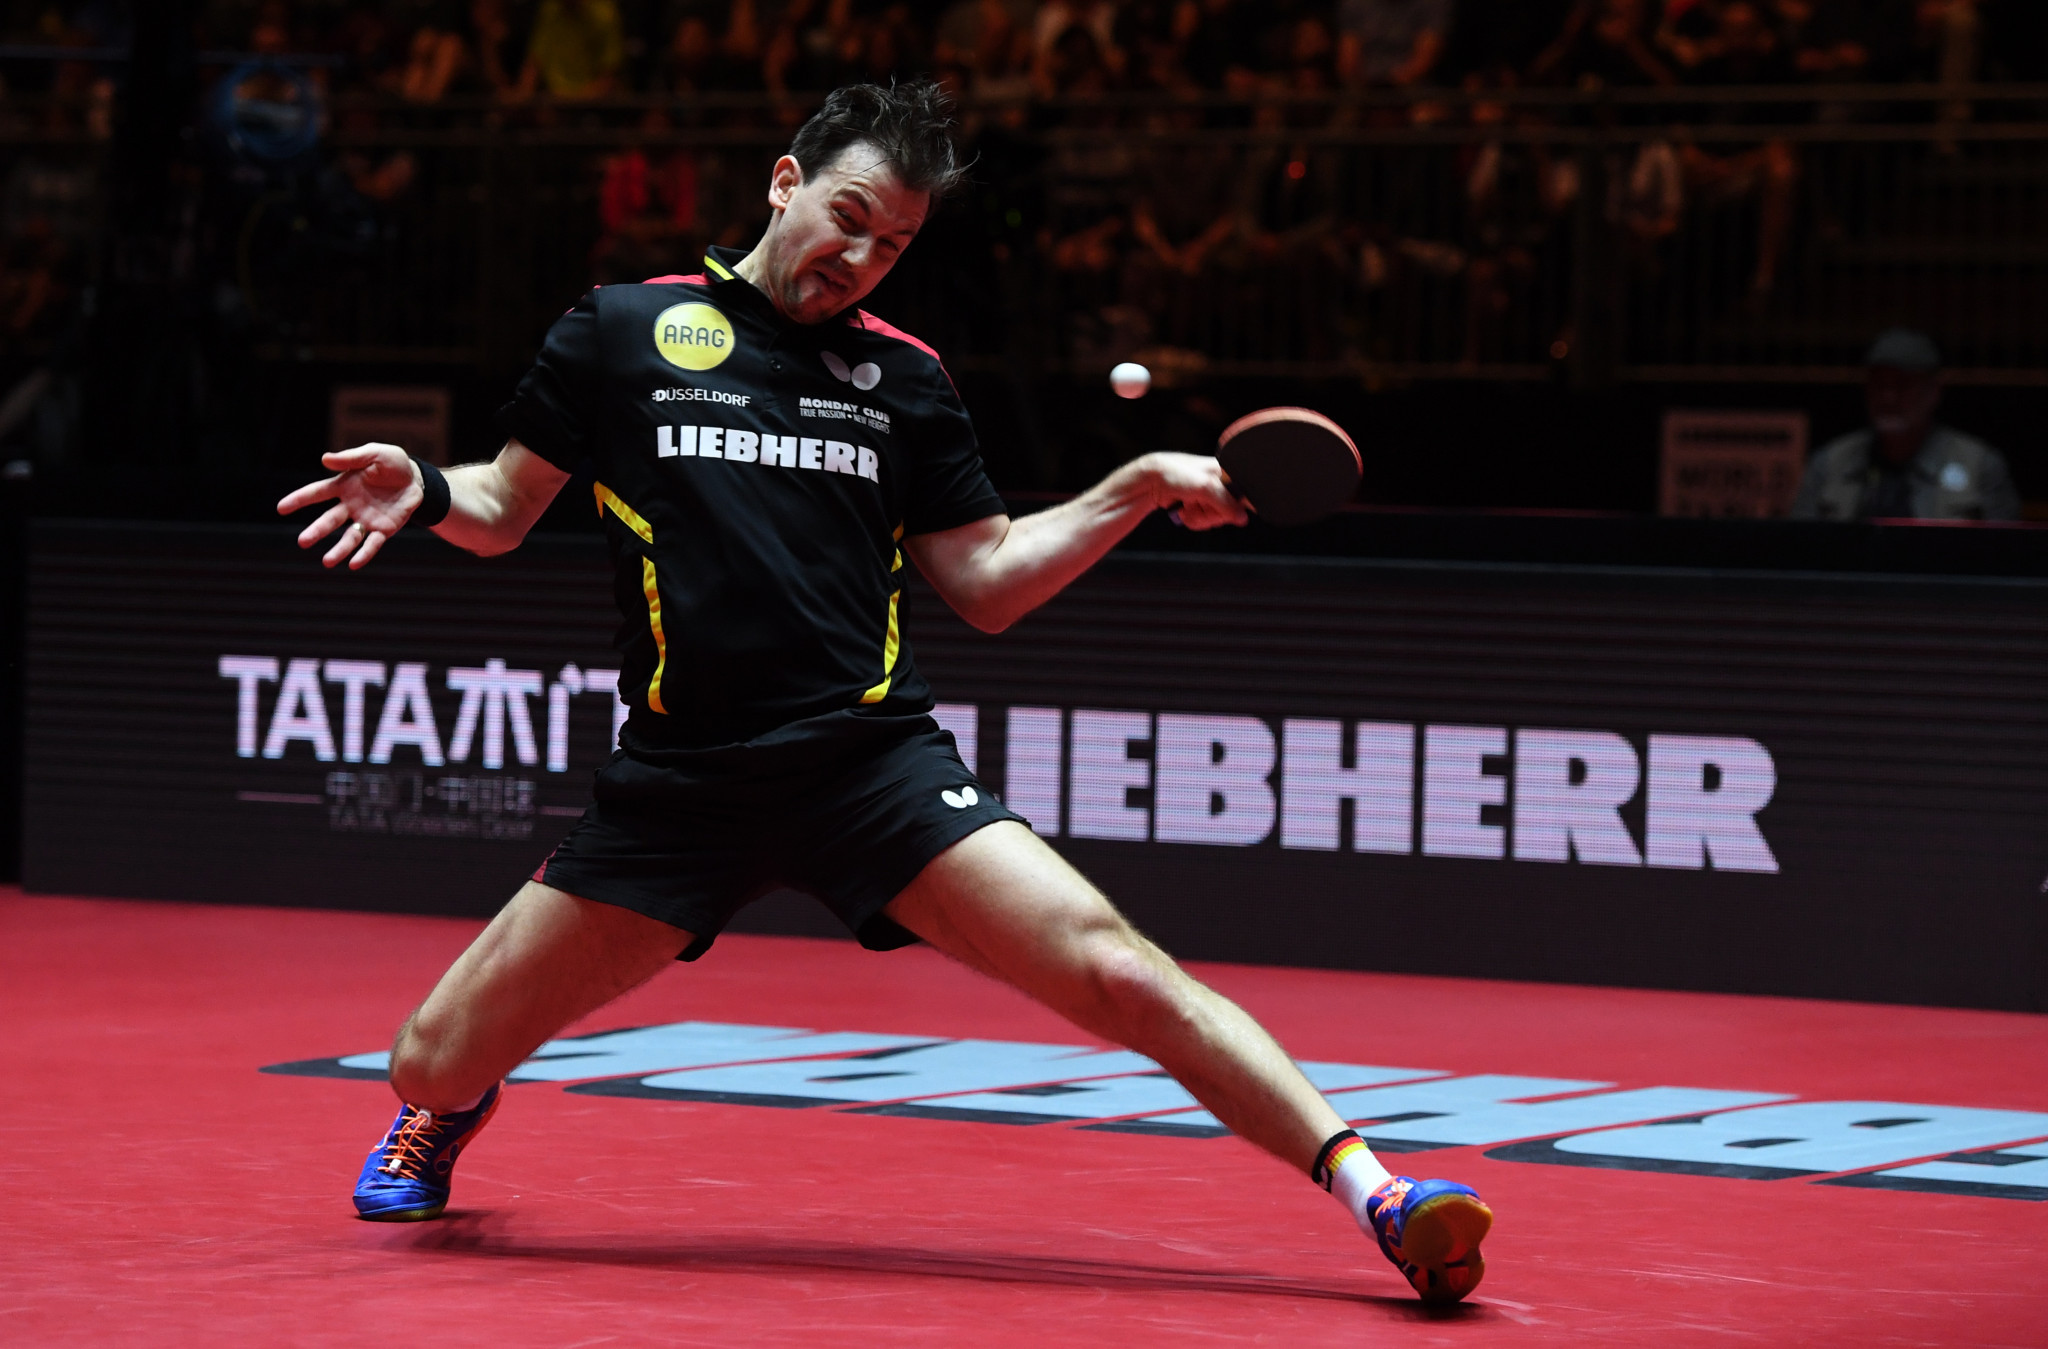 Germany's Timo Boll in action during the 2017 World Championships in Düsseldorf - the last time it was held in the German city ©Getty Images